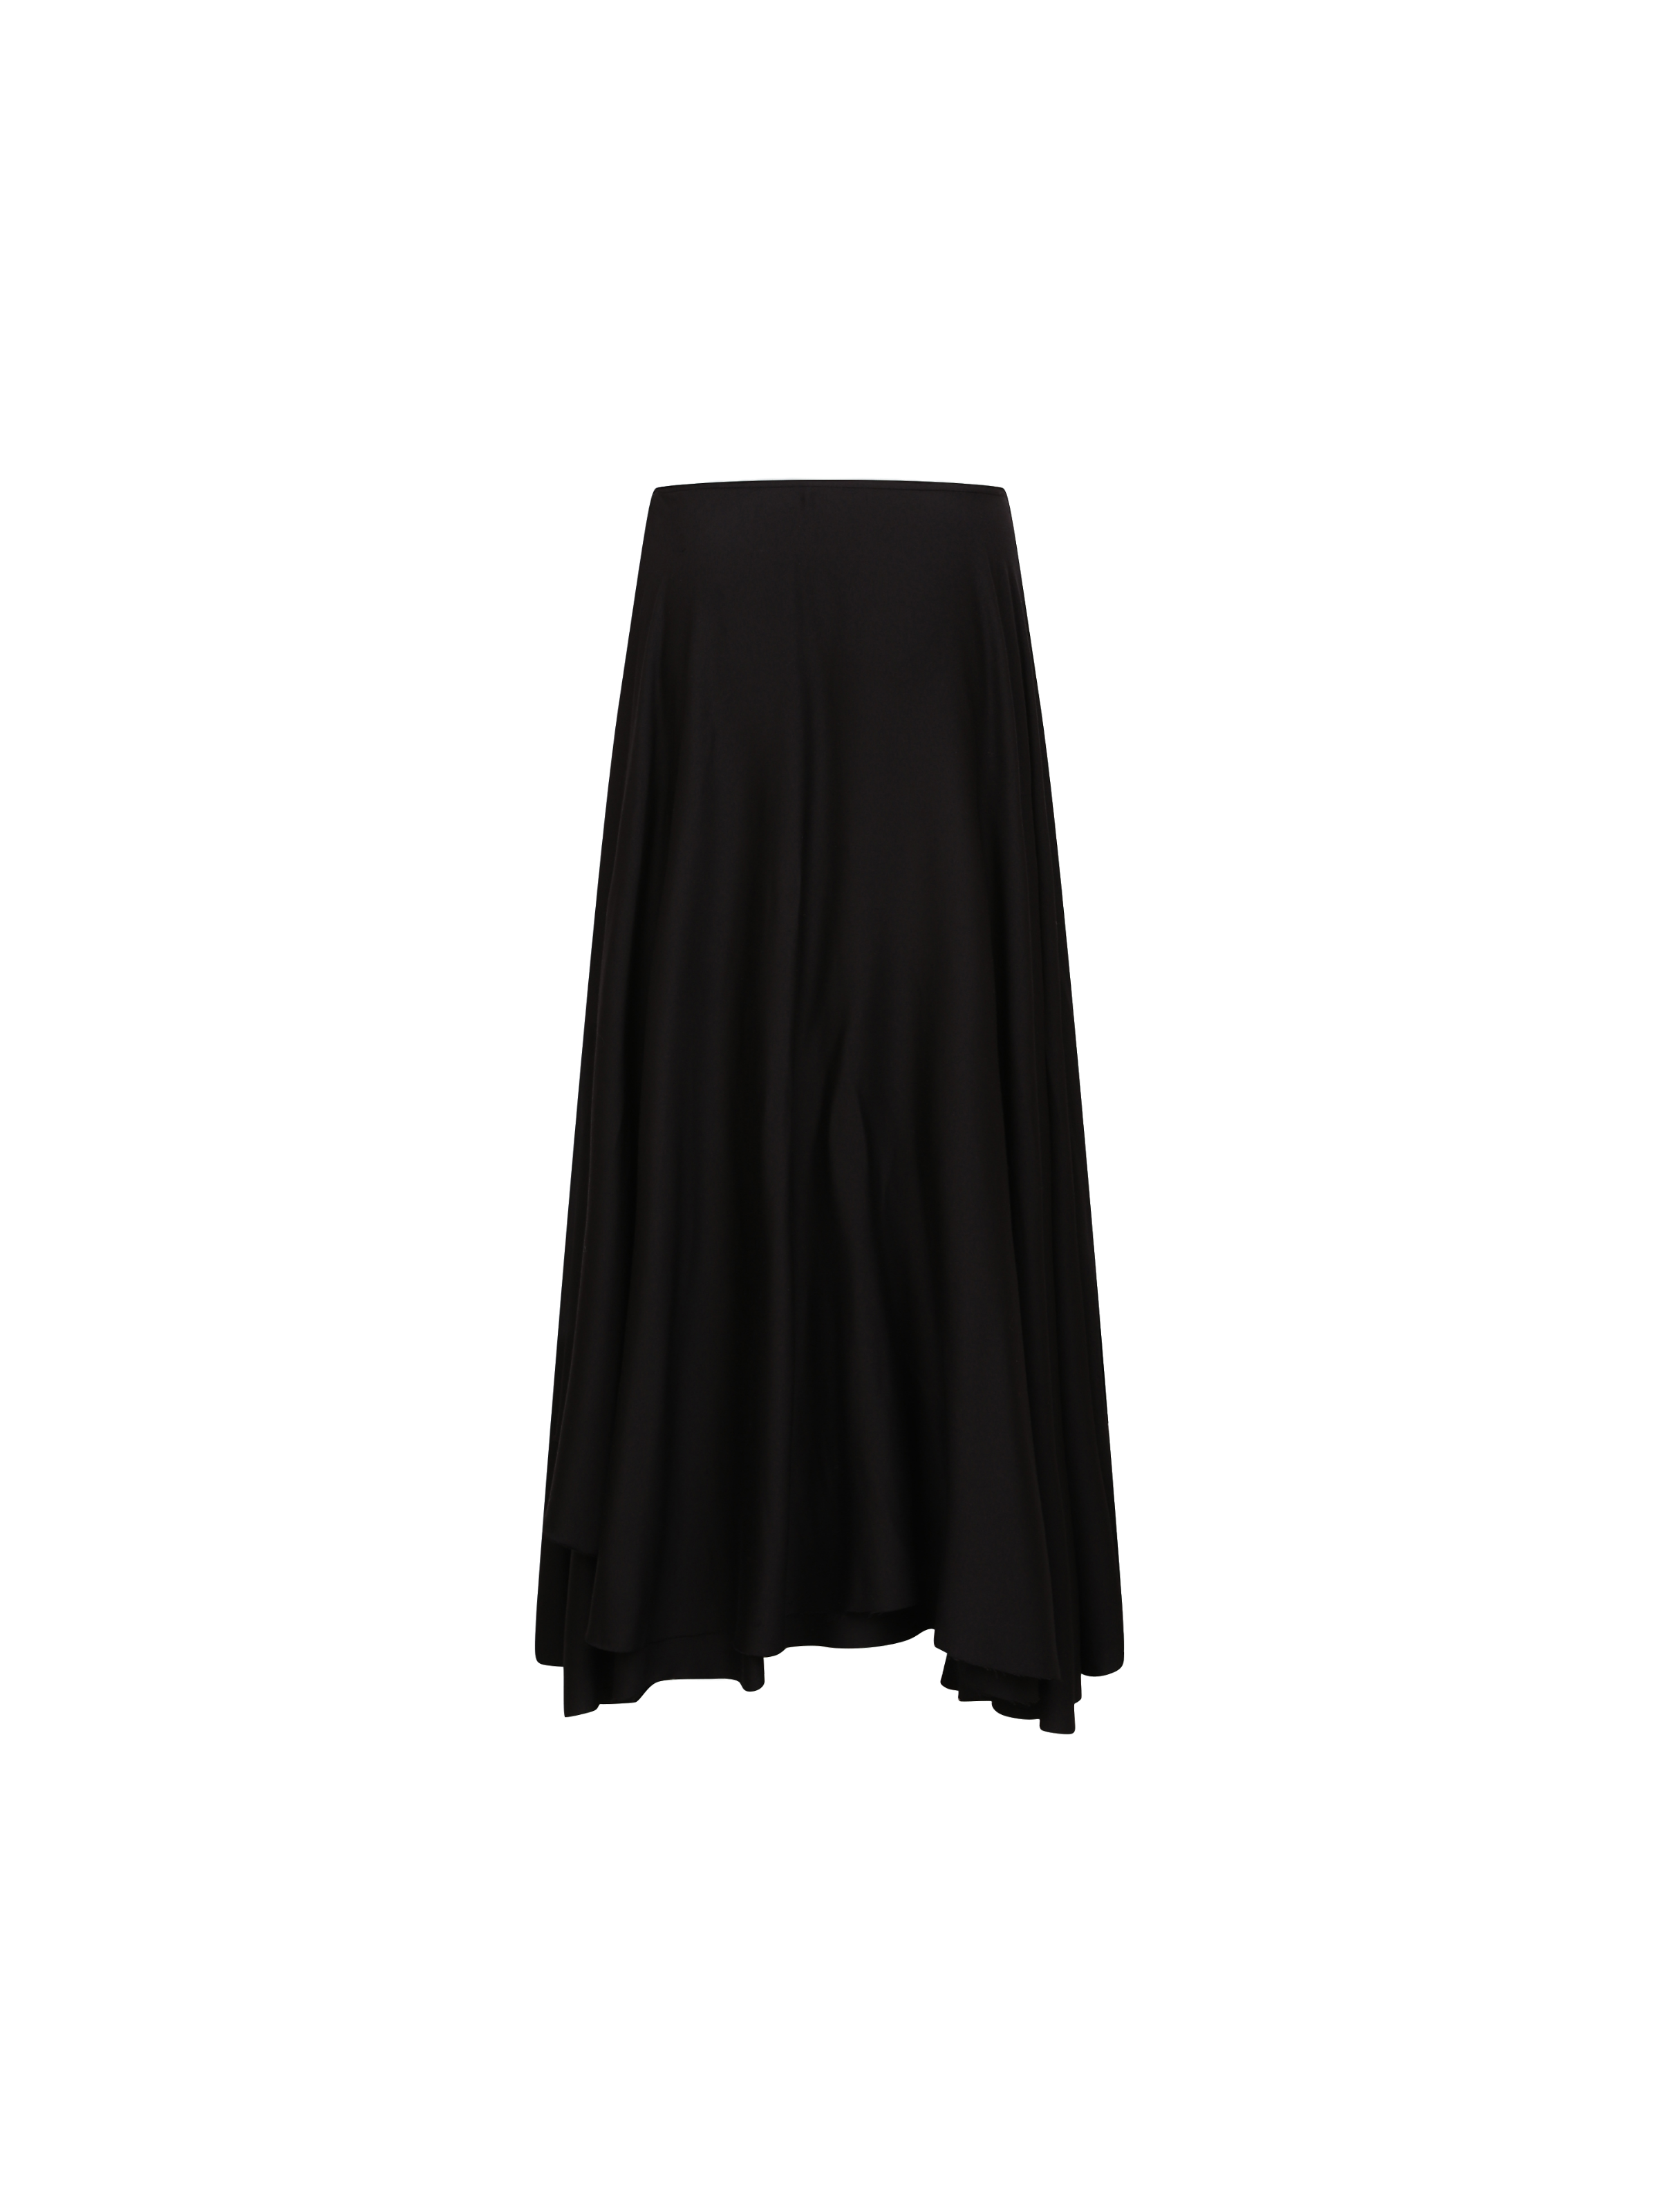 Black Staggered Layers Skirt